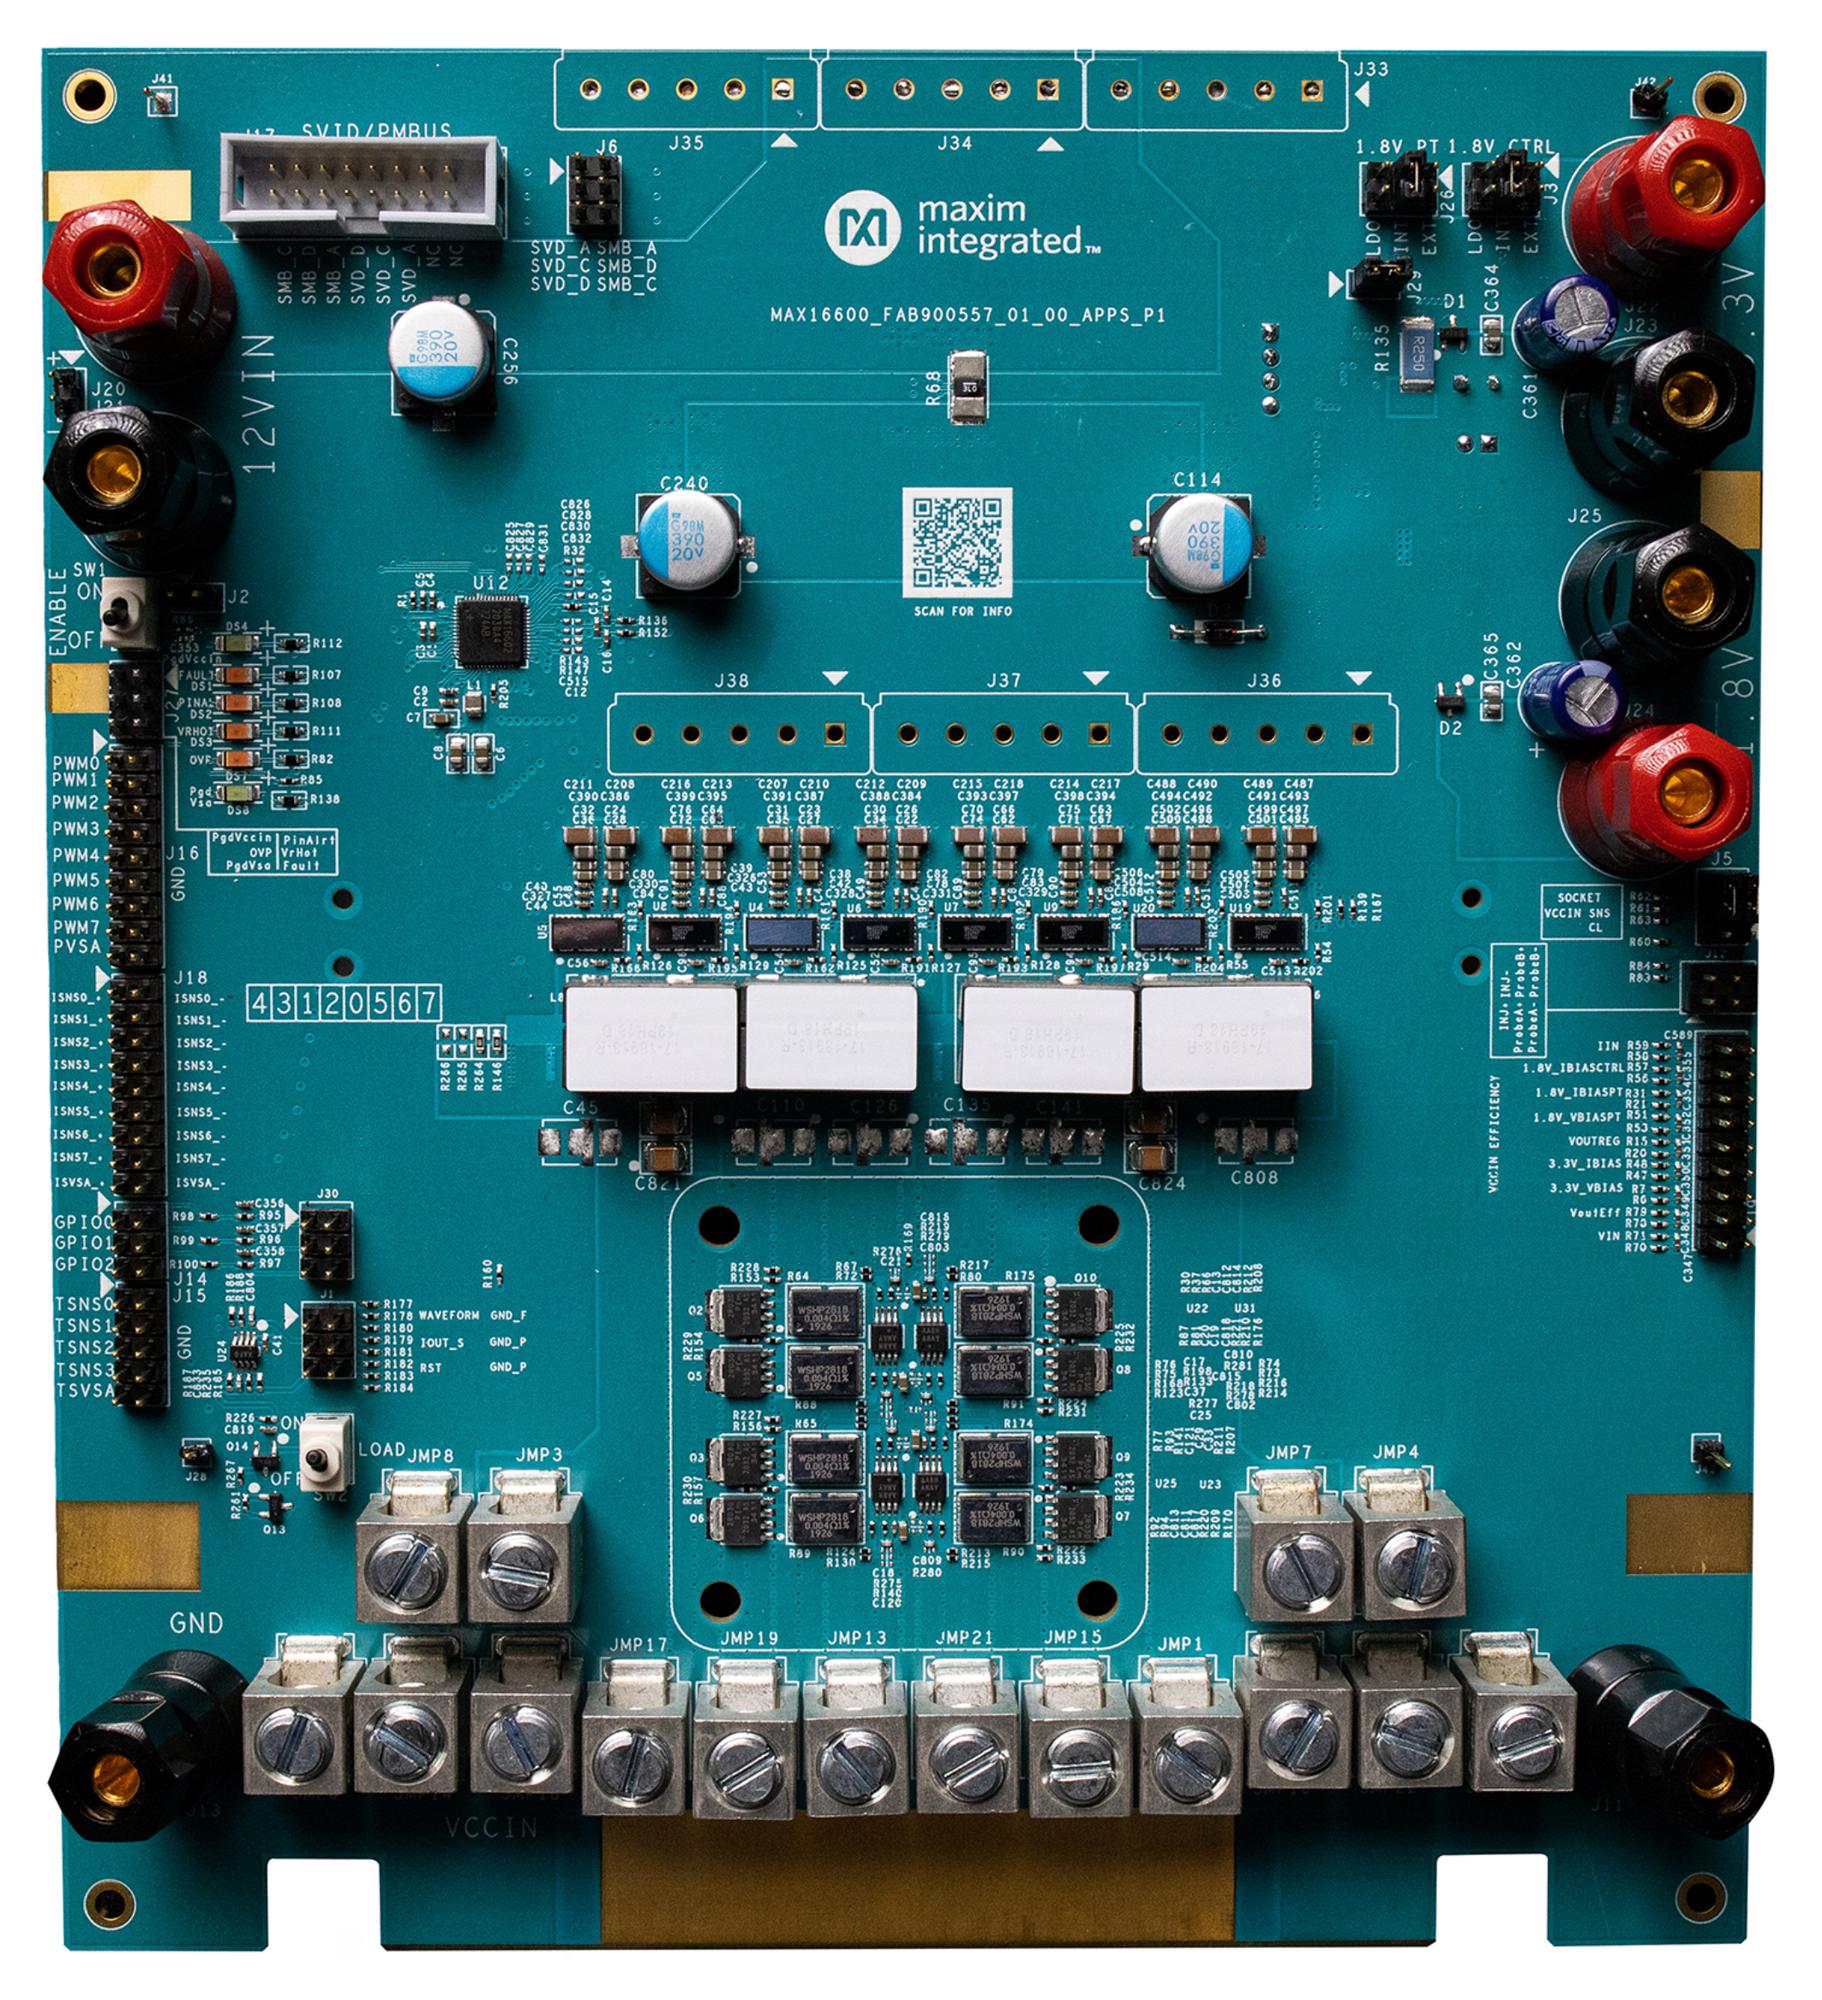 MAX16602CL8EVKIT# EVAL KIT, VR13.HC / AI CORE SERVER CPU MAXIM INTEGRATED / ANALOG DEVICES